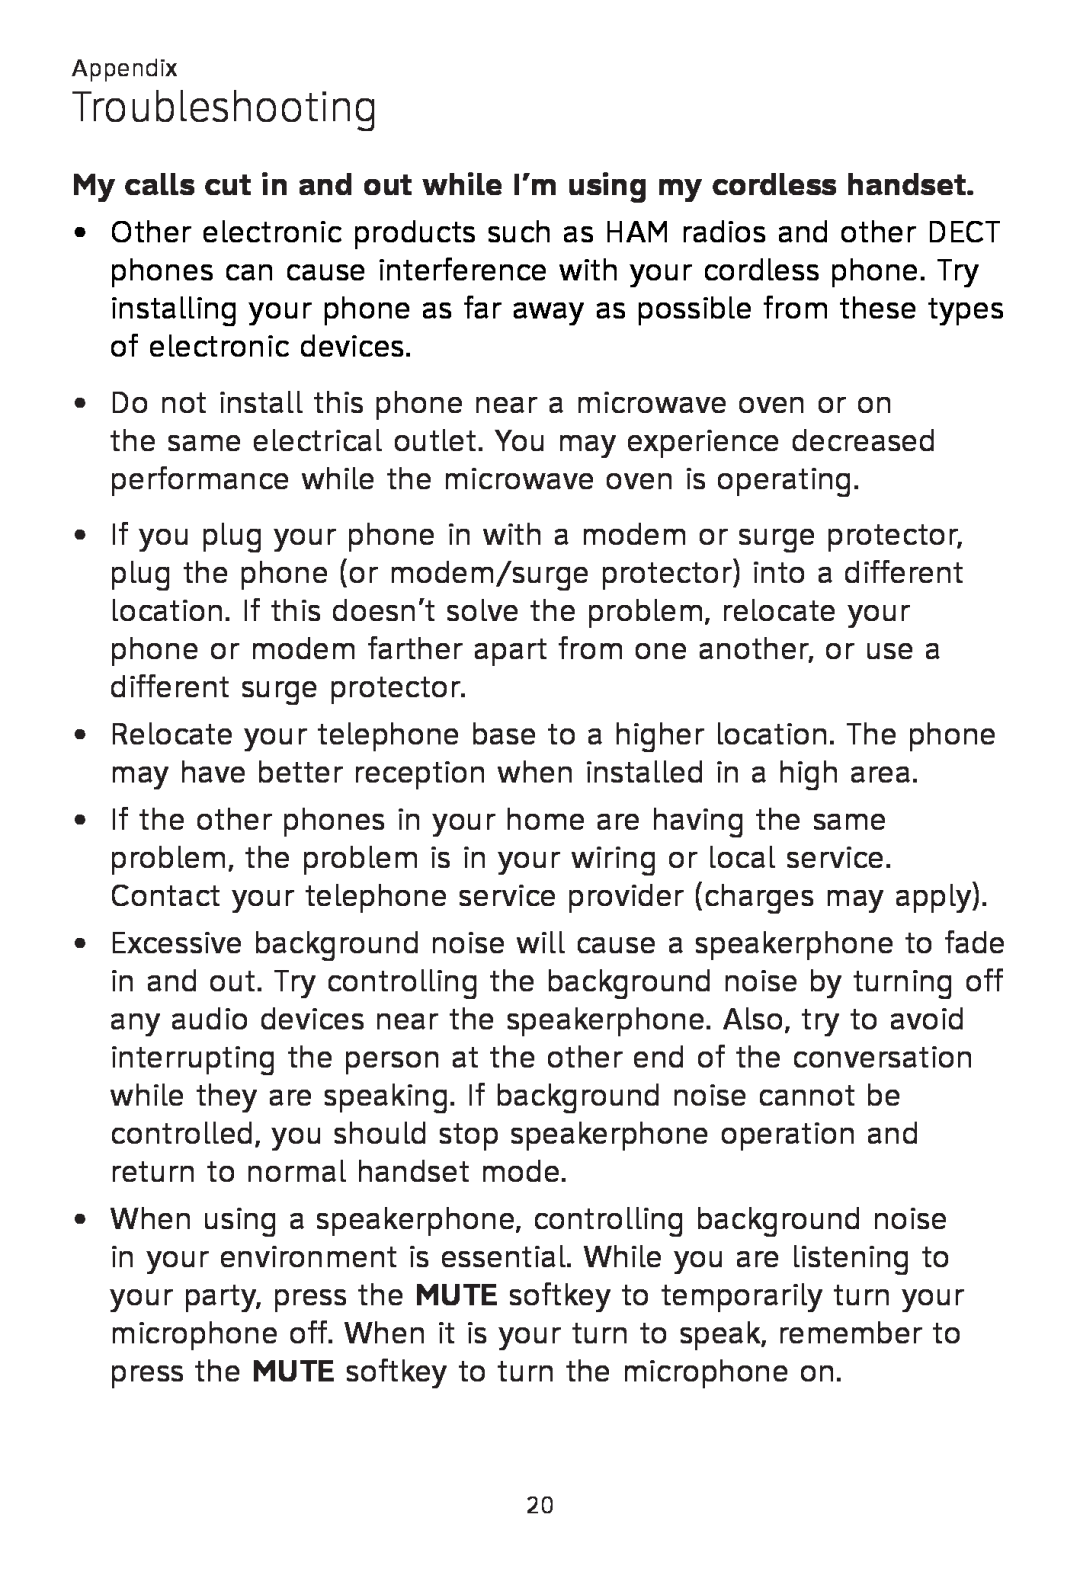 AT&T TL86109, TL86009, TL 86009 user manual My calls cut in and out while I’m using my cordless handset, Troubleshooting 